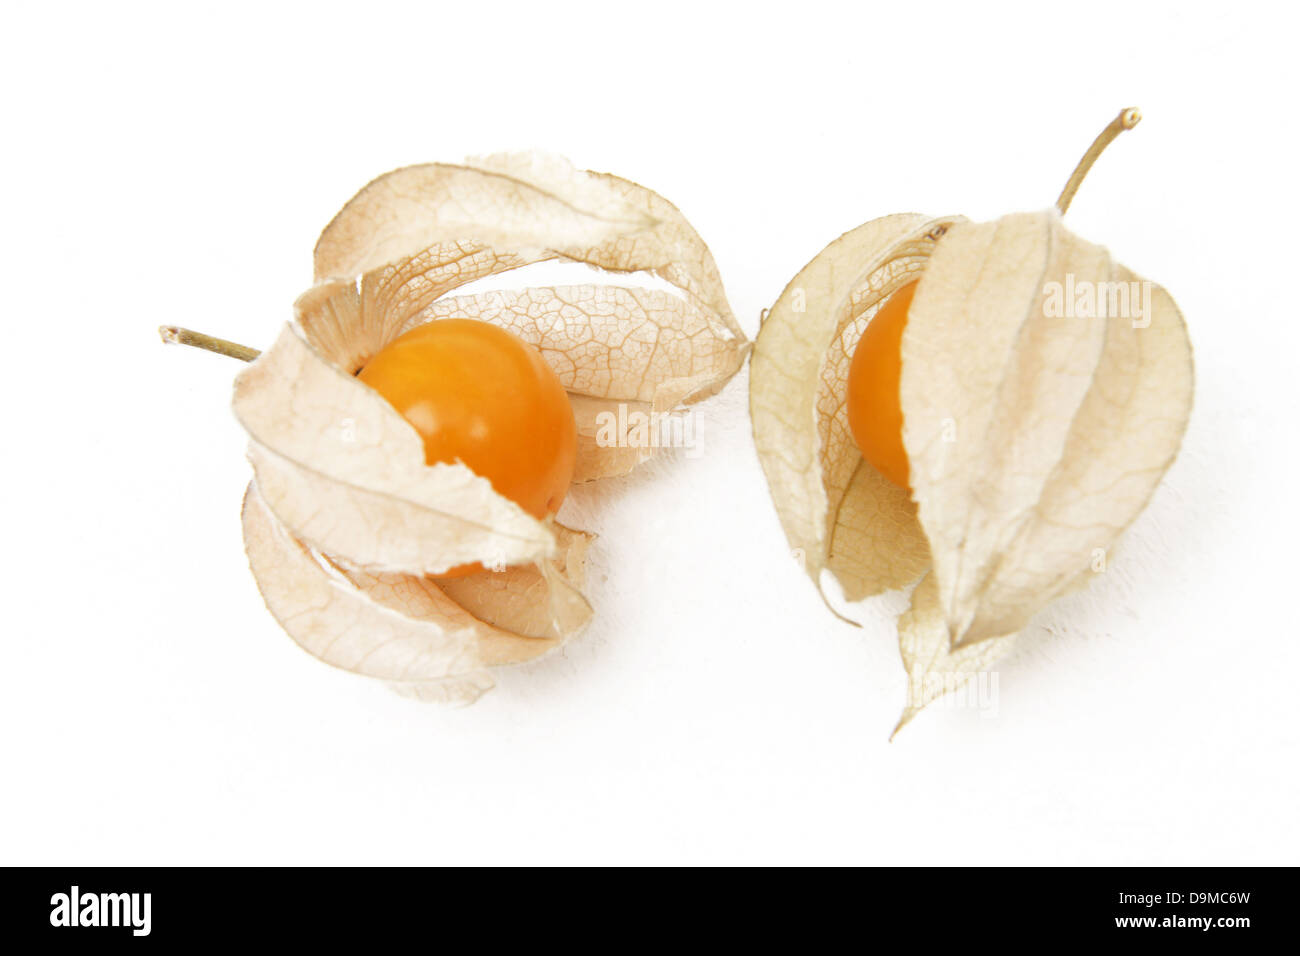 Ripe Cape Gooseberries (Physalis Peruviana) In Calyx From The Nightshade Family Stock Photo